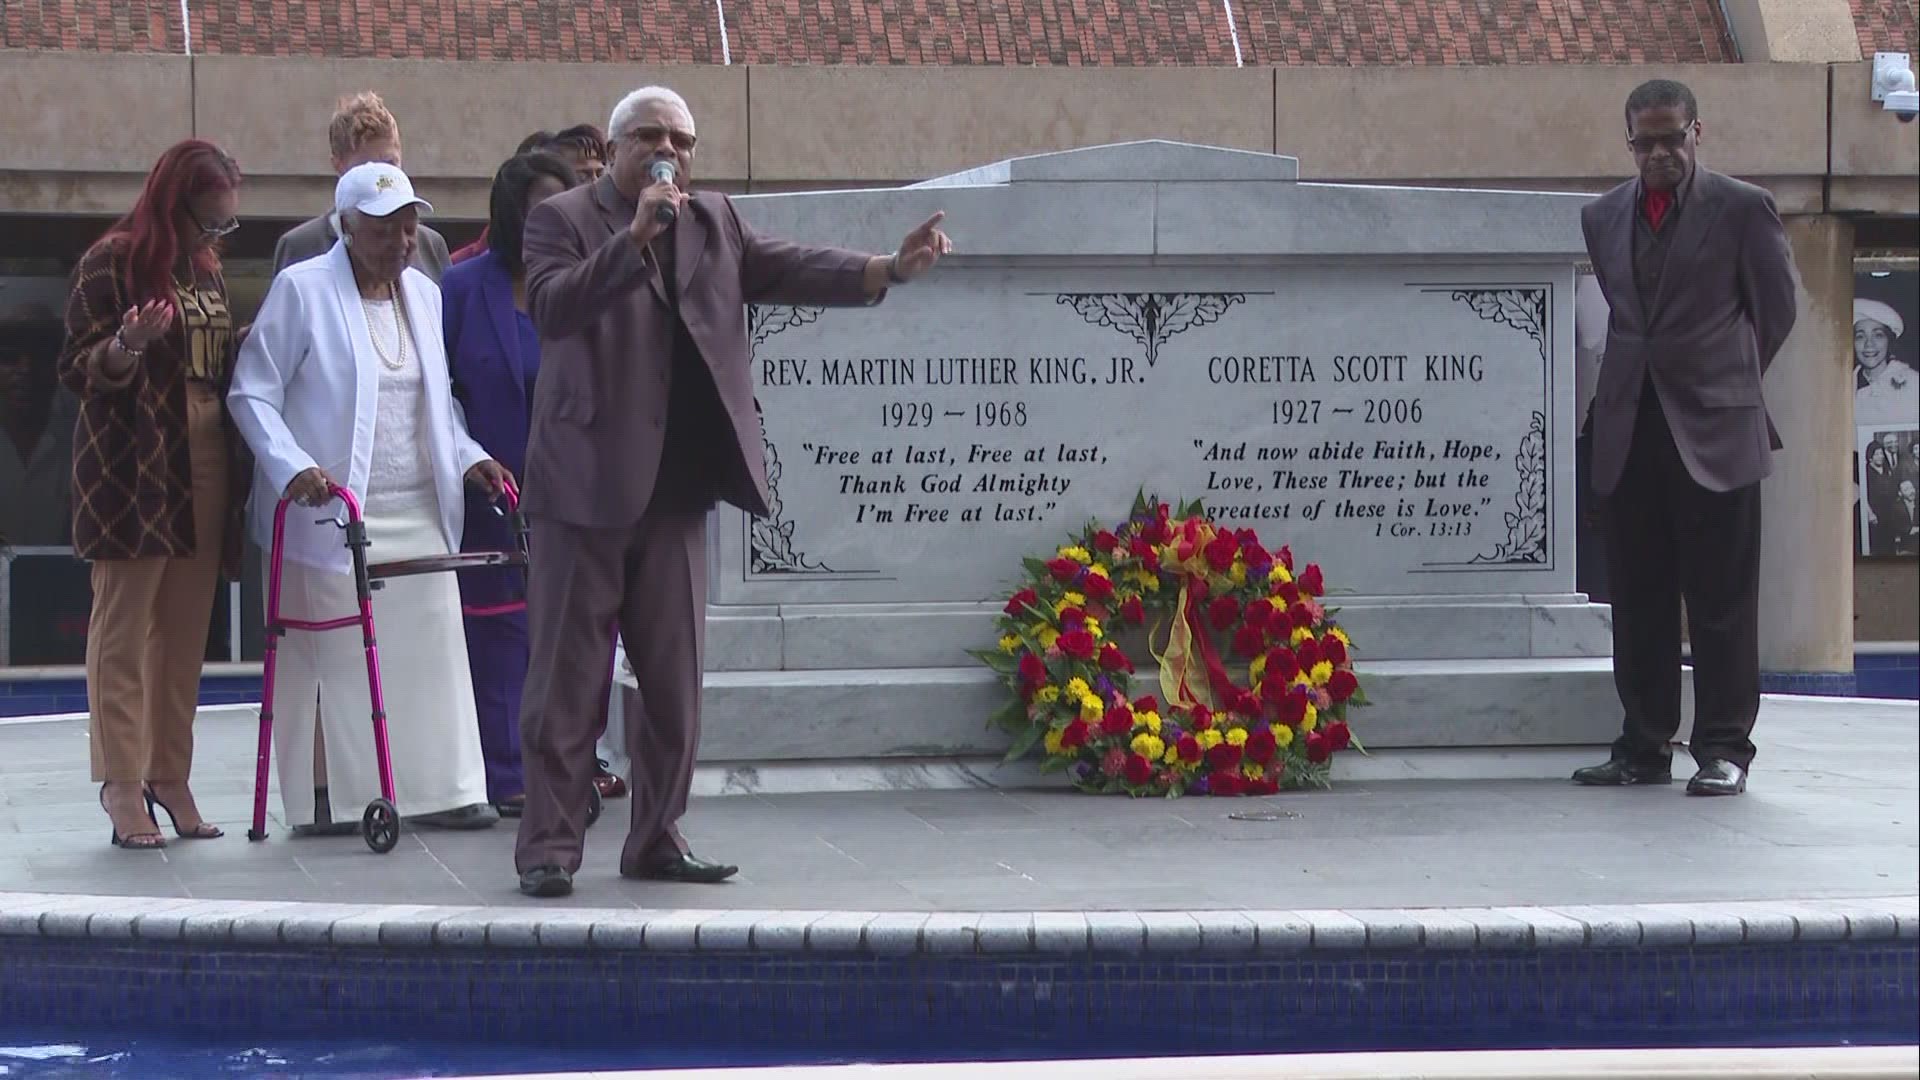 Wreath-laying ceremony honors Dr. Martin Luther King Jr., 55 years after  assassination